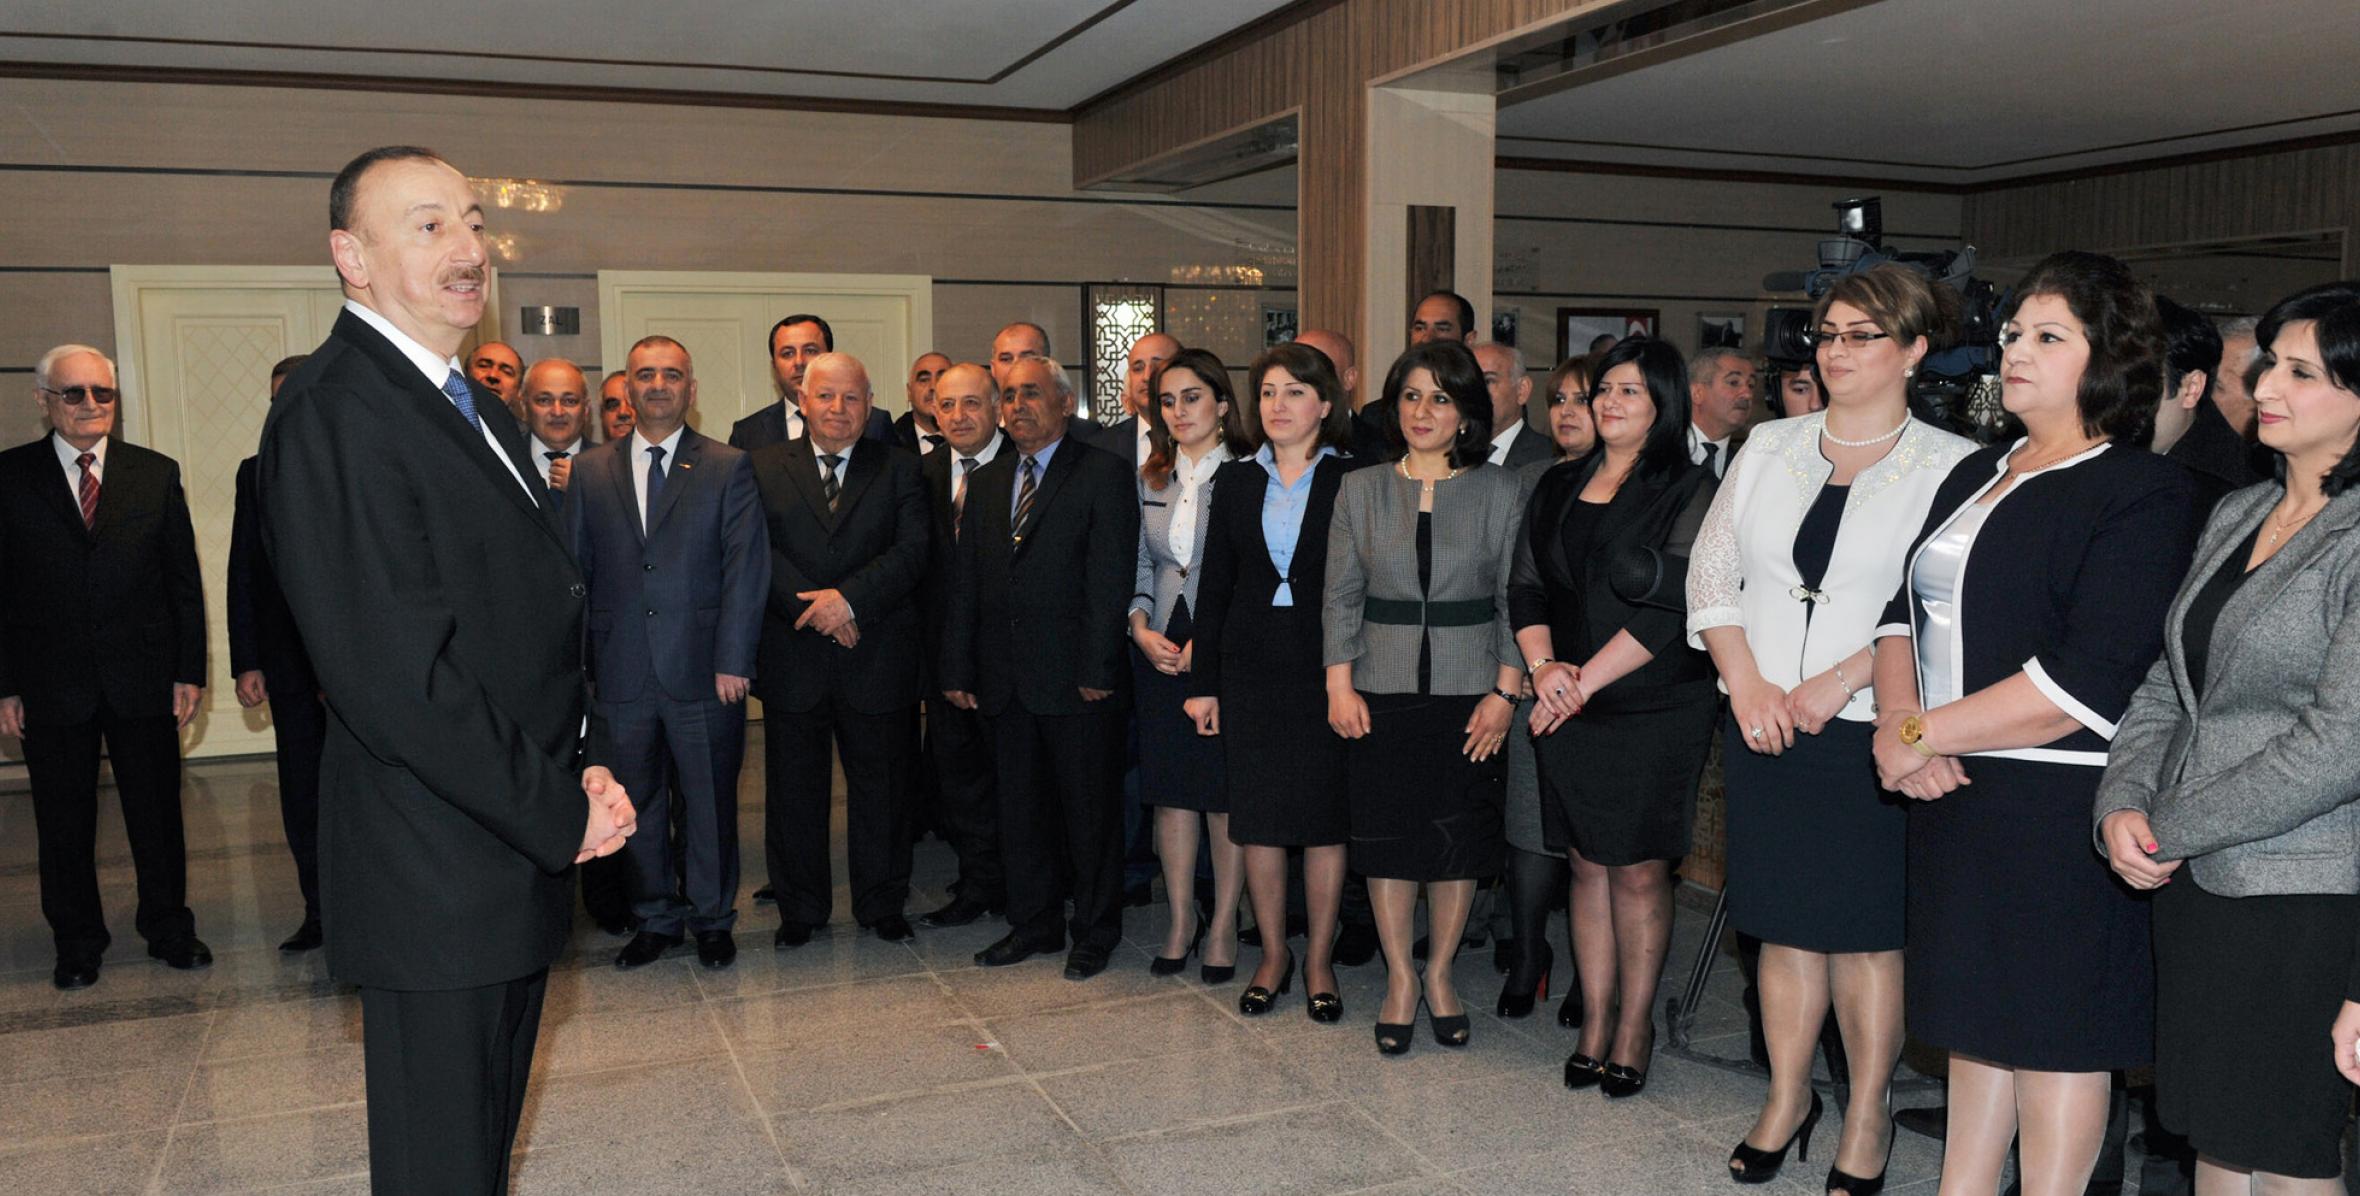 Speech by Ilham Aliyev at the opening of the Culture Center in Lankaran after major overhaul